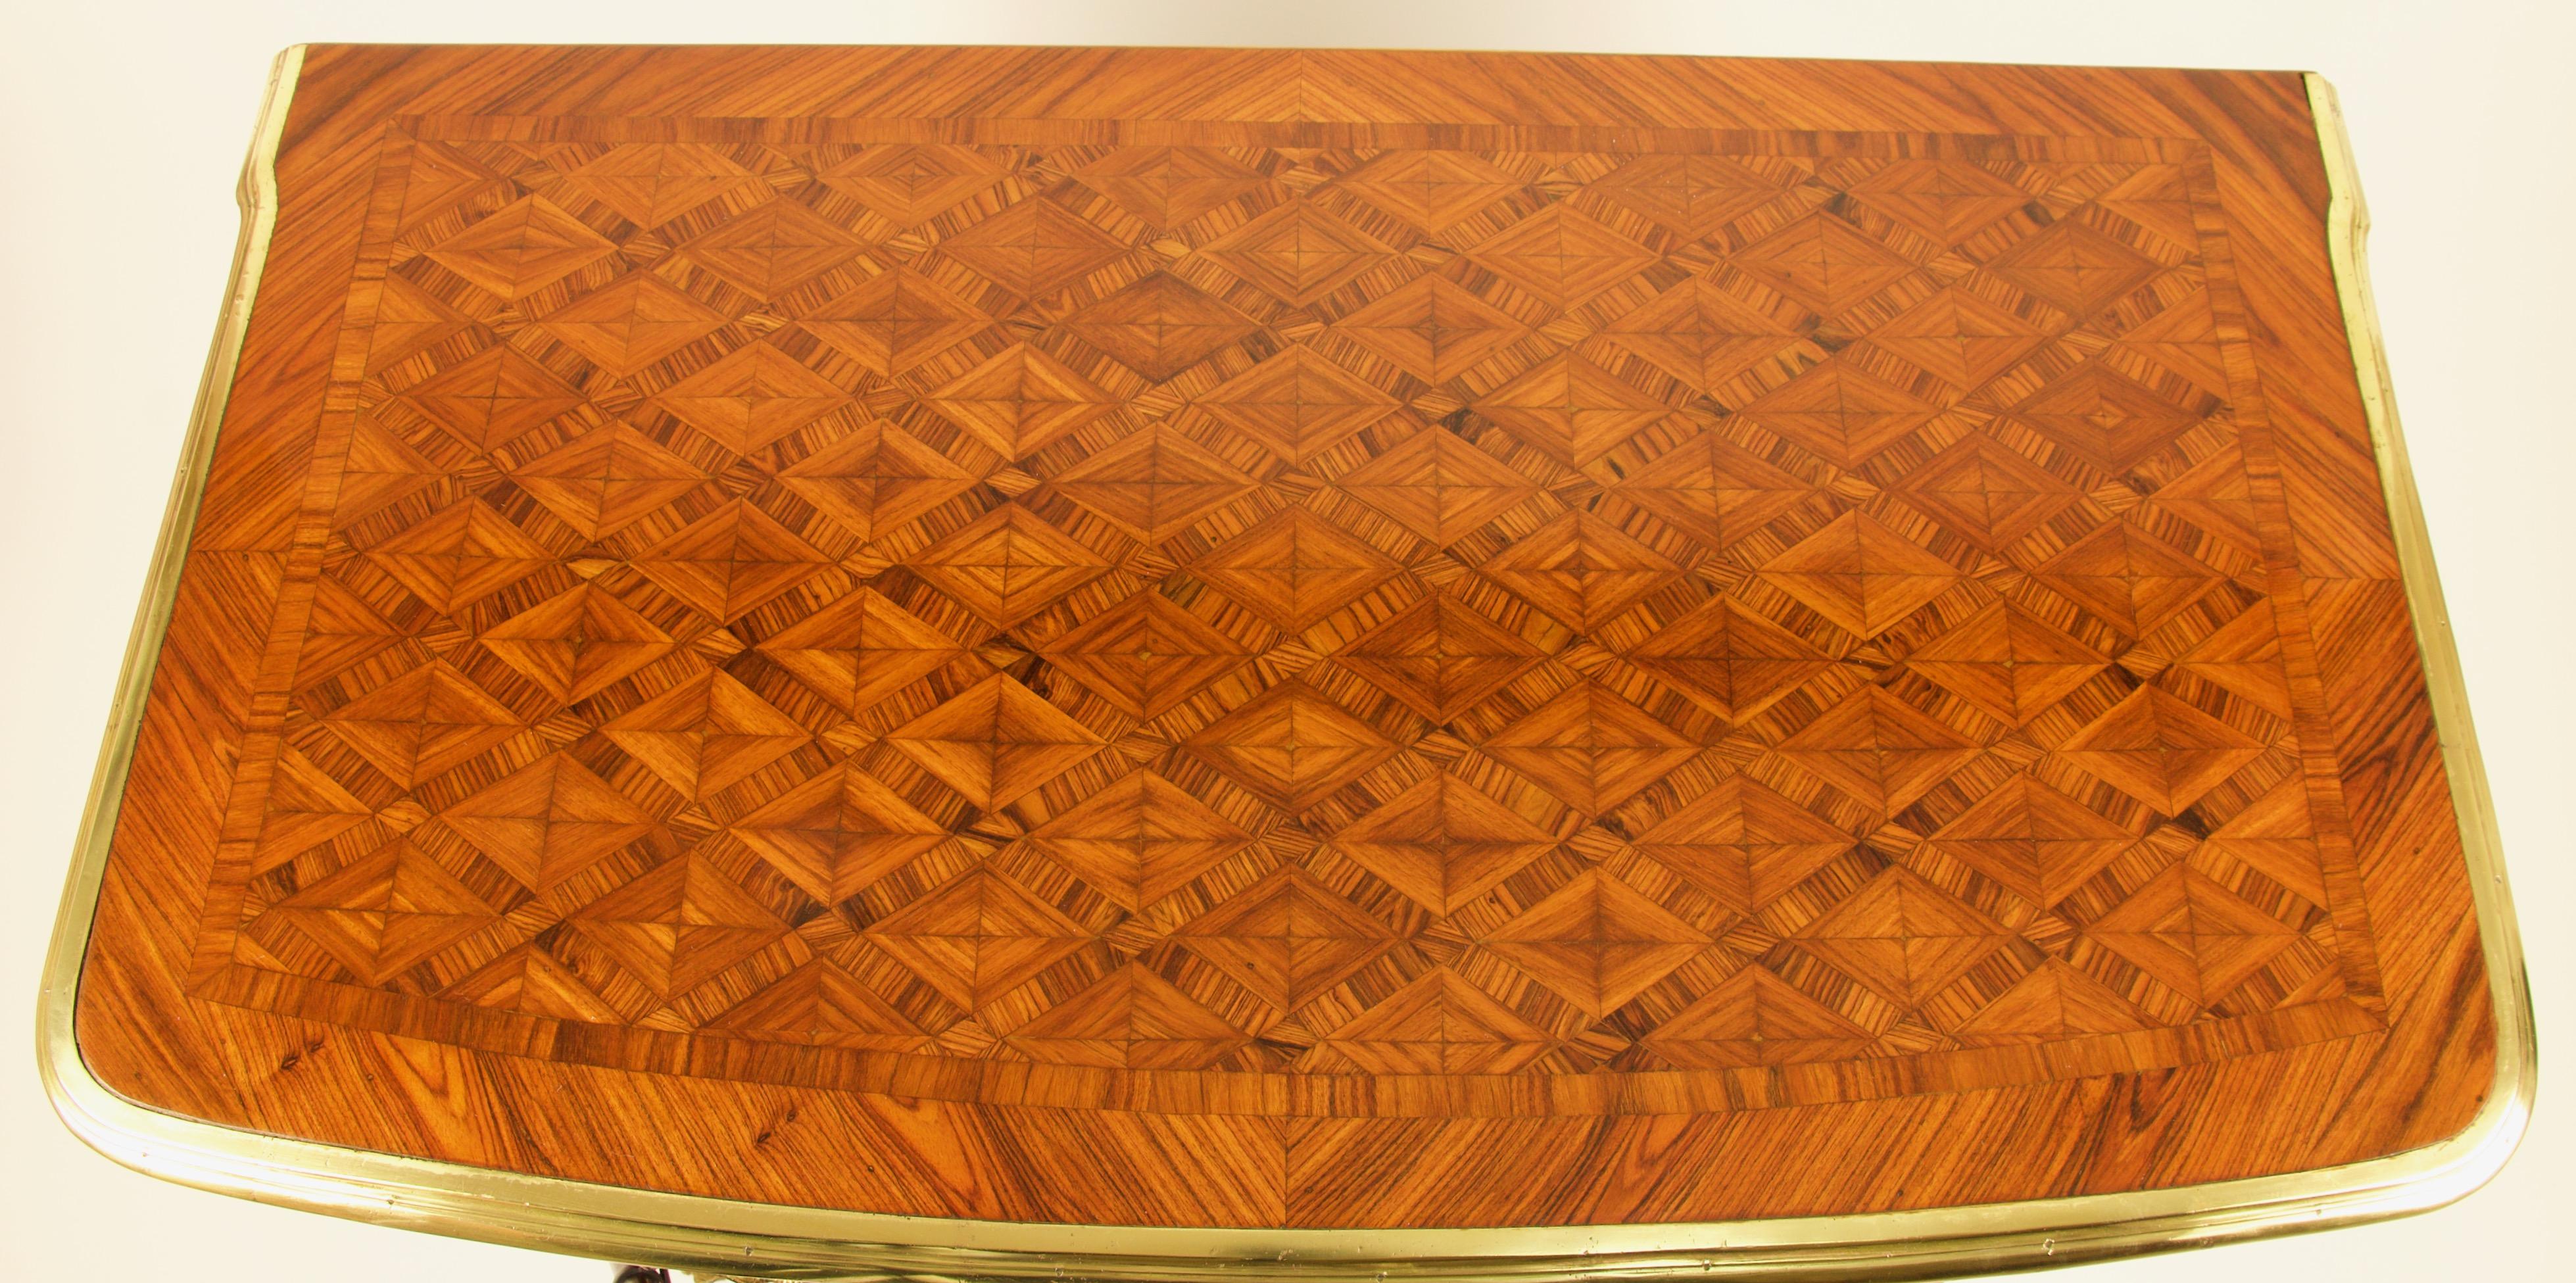 19th Century French Louis XIV Régence Trelliswork Marquetry Commode or Sauteuse For Sale 5